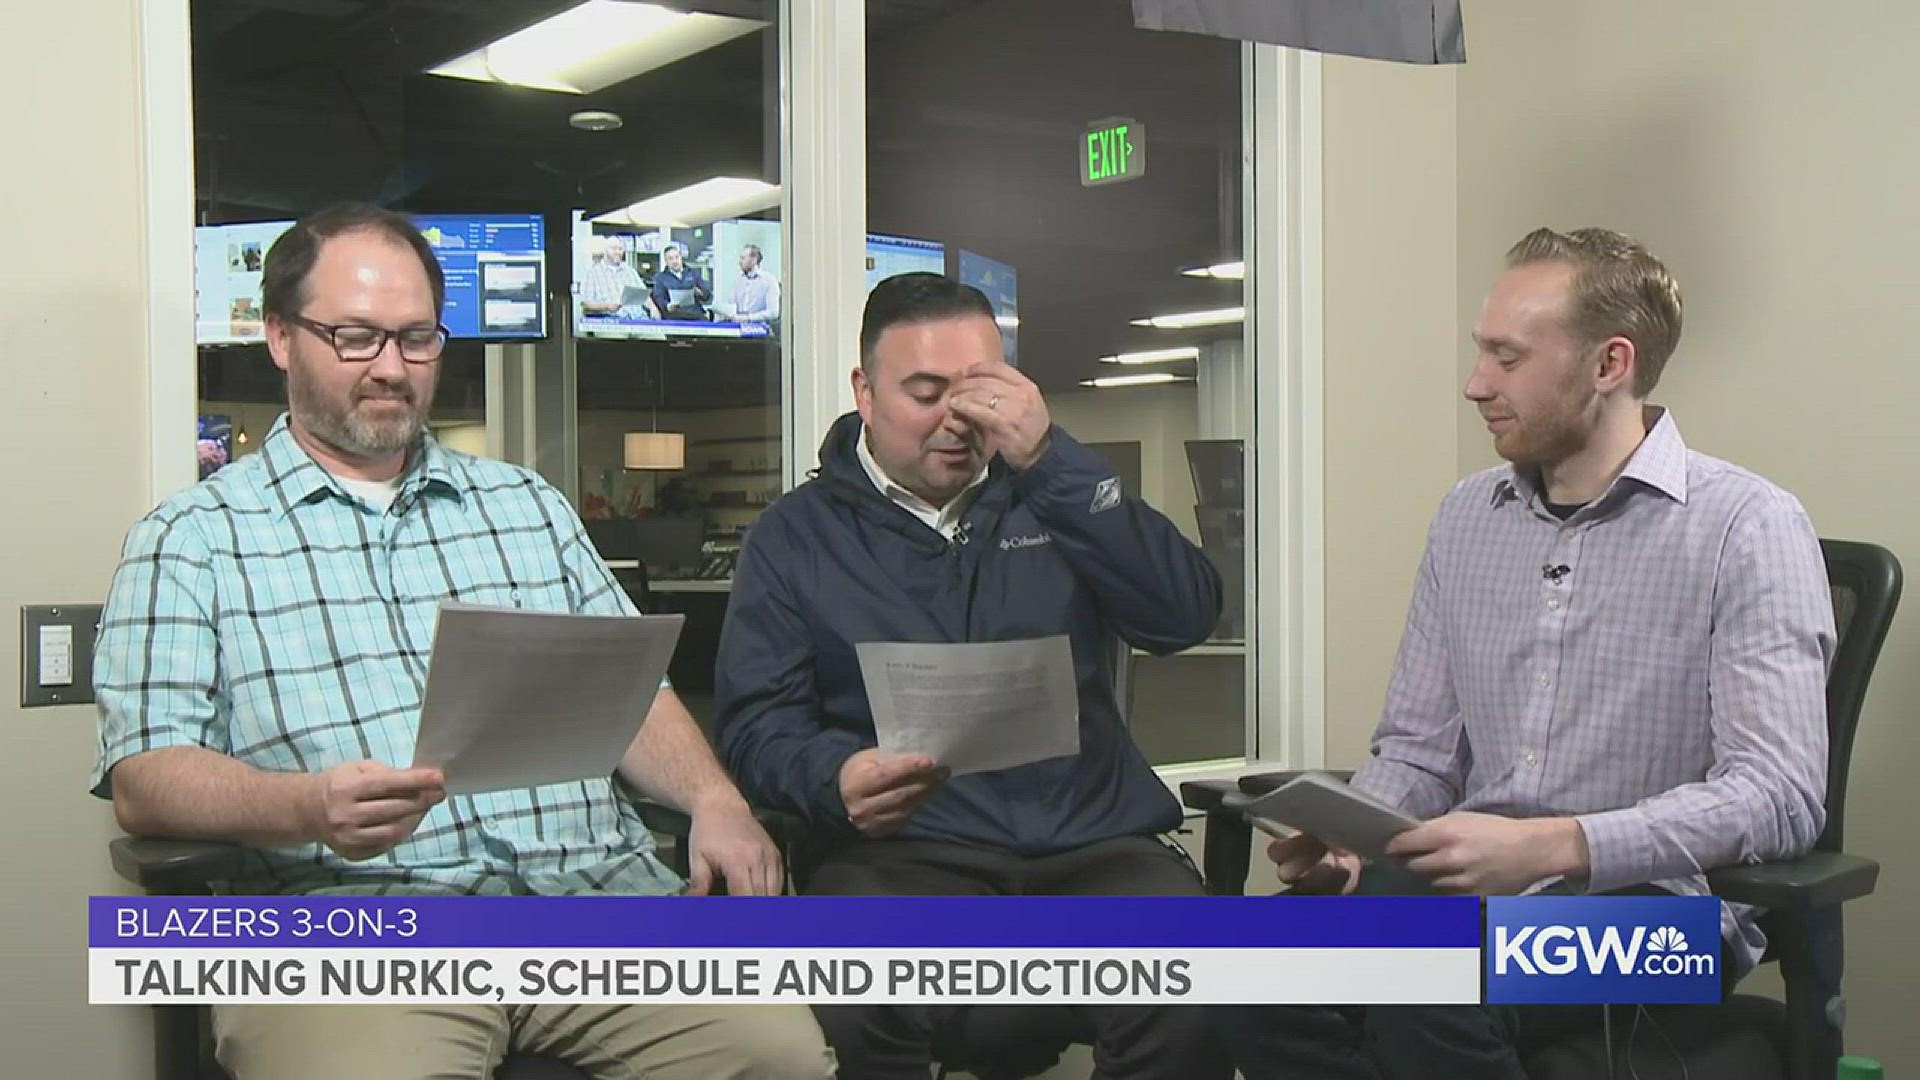 KGW's Jared Cowley, Orlando Sanchez and Nate Hanson talk about NY Times NBA reporter Marc Stein's prediction that the Blazers will trade CJ McCollum this year.